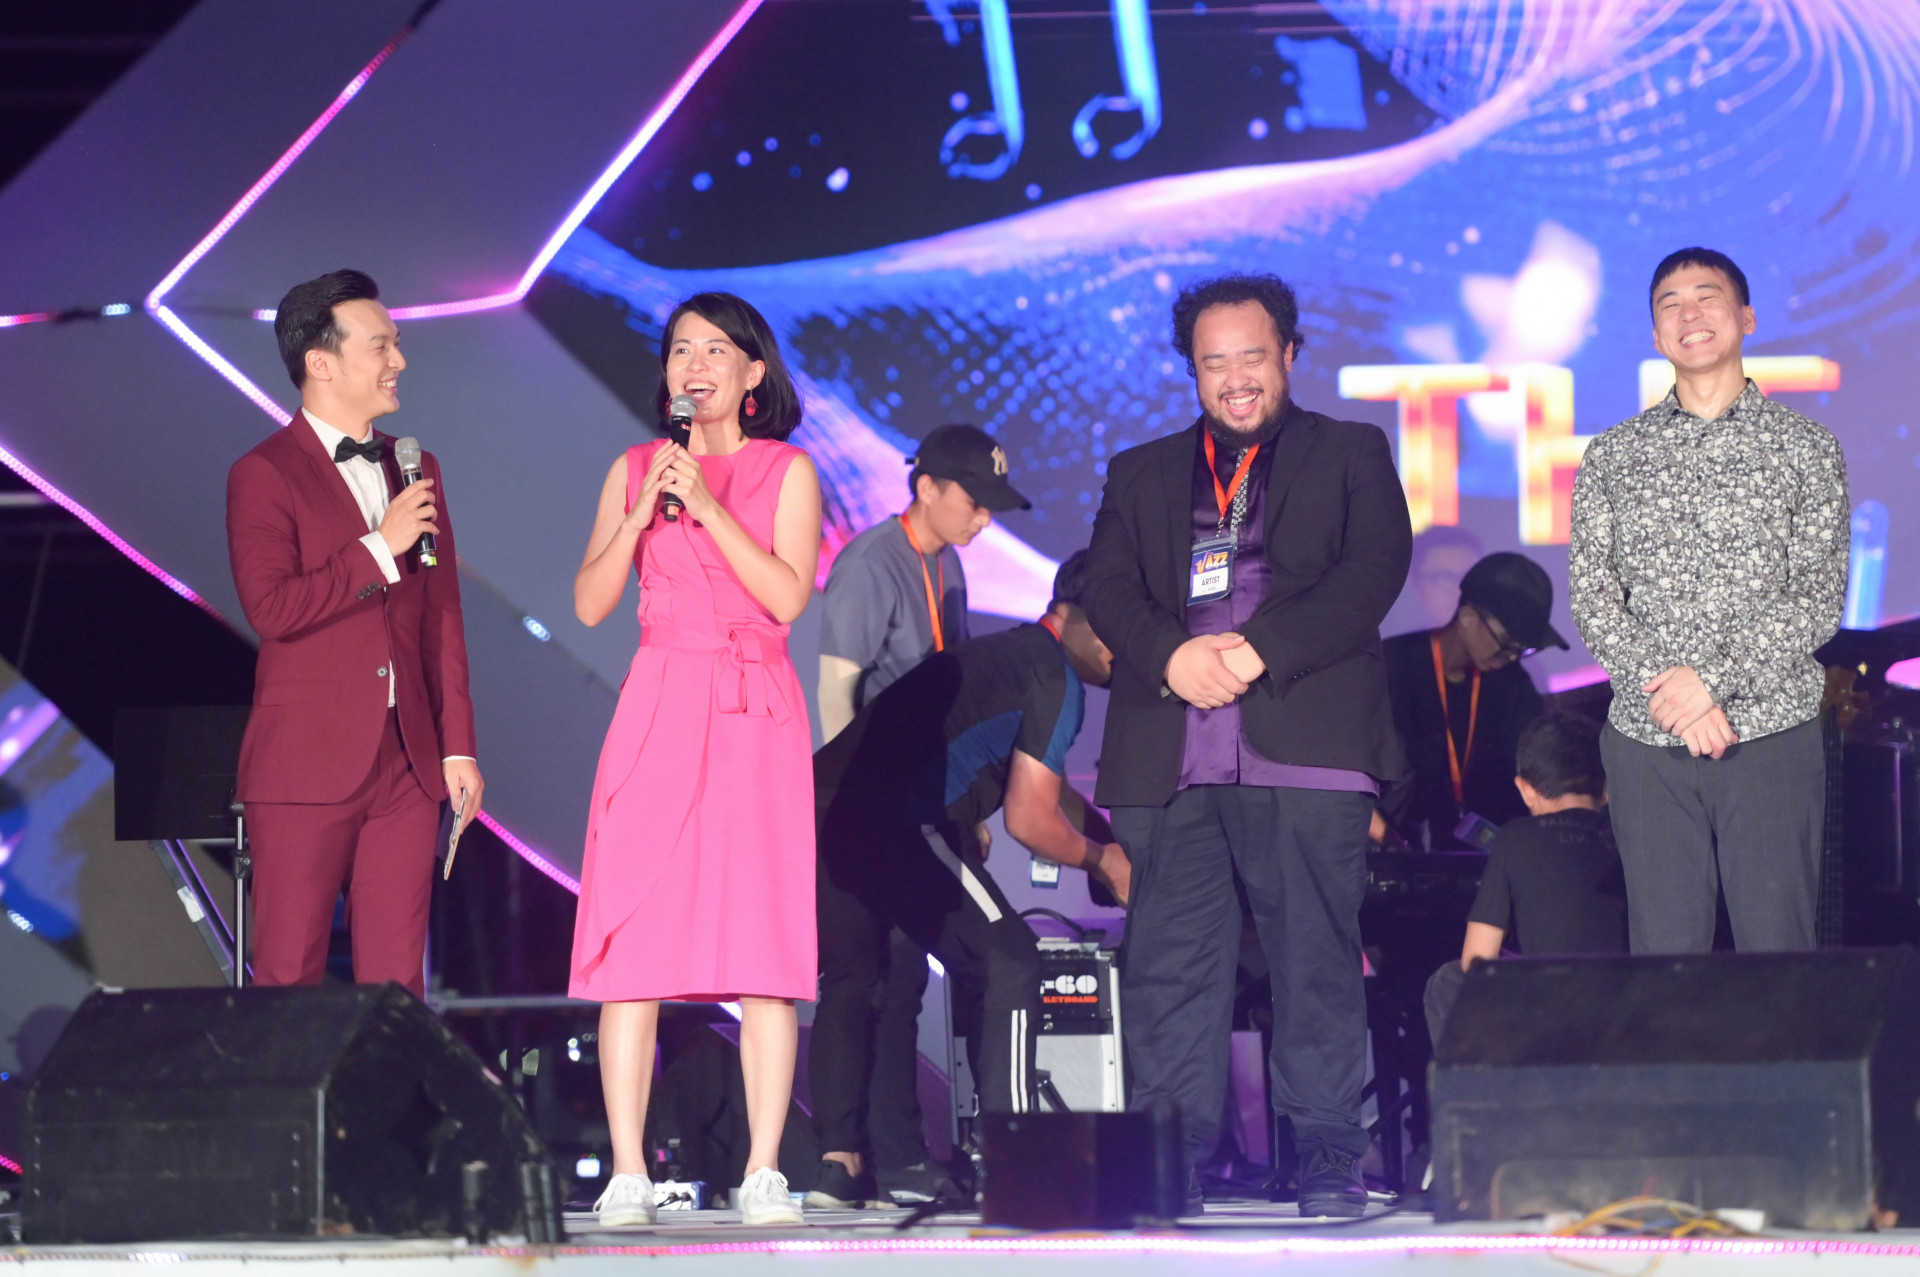 Amanda Lee says that Nha Trang City is an ideal venue for jazz concerts like this international concert. She and her band members have enjoyed their time in Nha Trang as well as local food such as pho, banh mi, banh xeo, etc.

